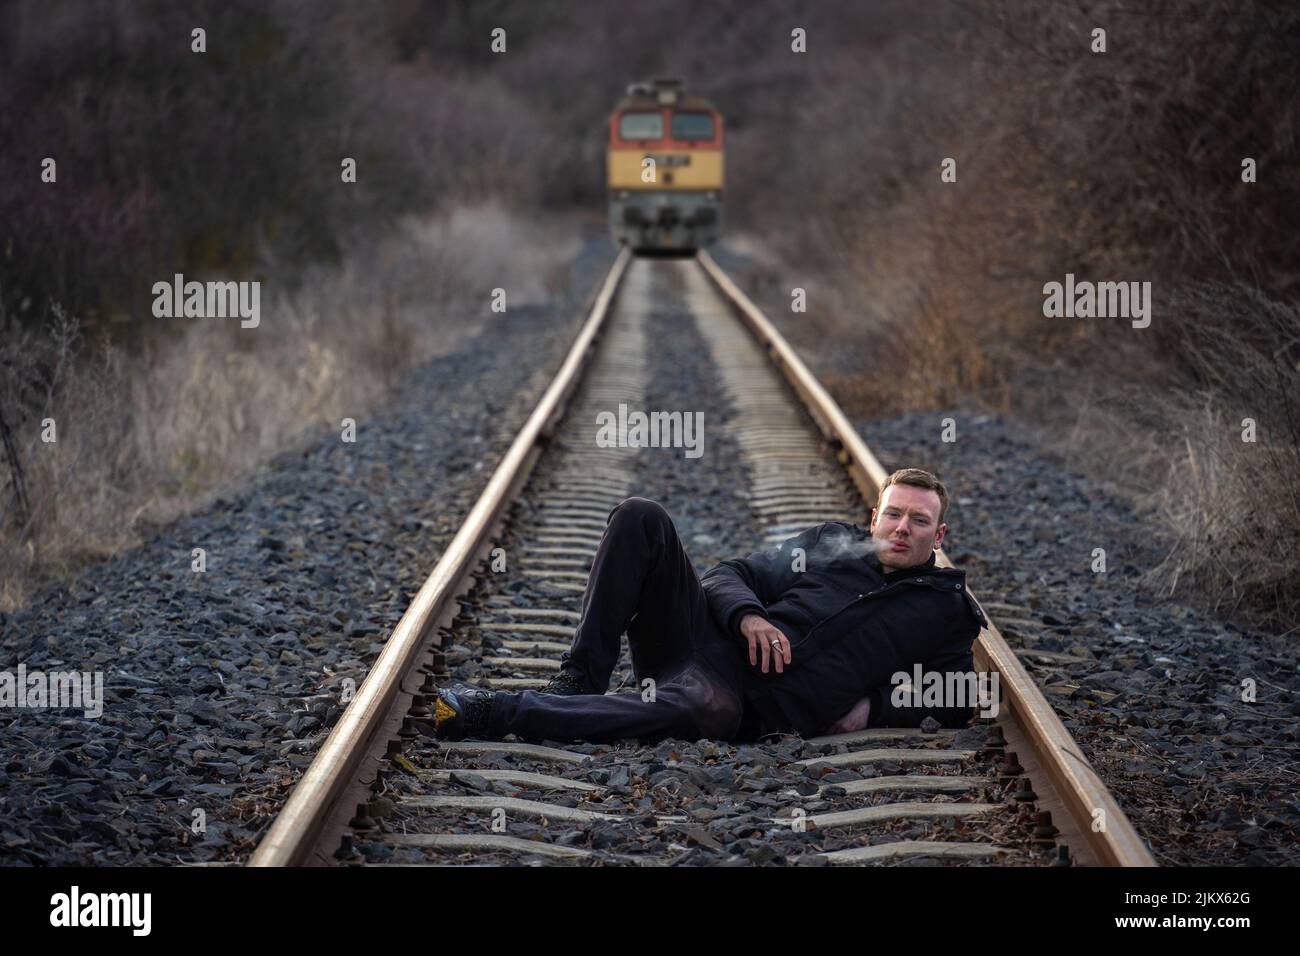 Young man lying on the railway track smoking a cigarette while a train is coming in the background Stock Photo